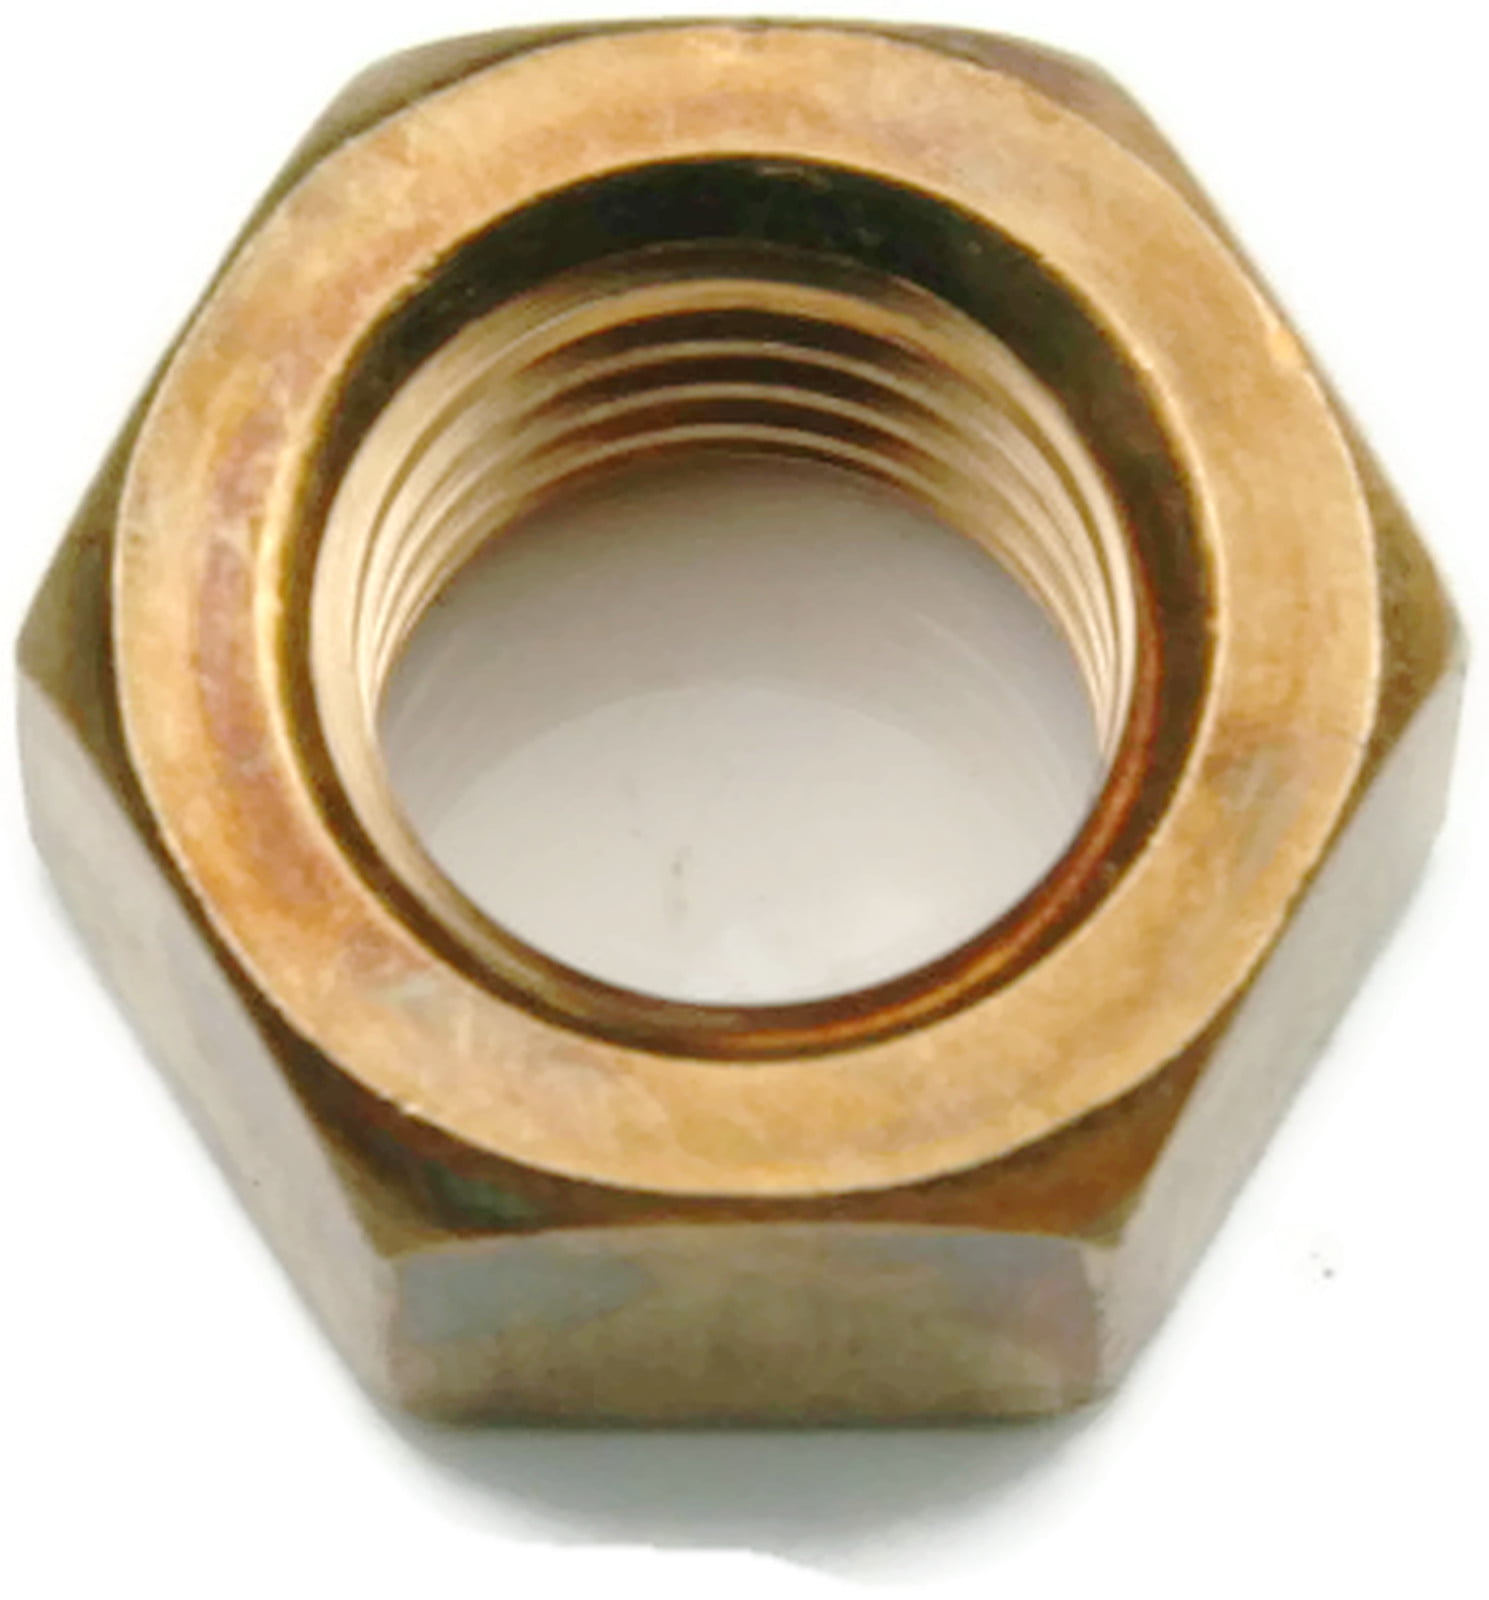 3/8-24 9/16 Flats x 21/64 Thick Hex Finish Nuts Silicon Bronze Qty-25 